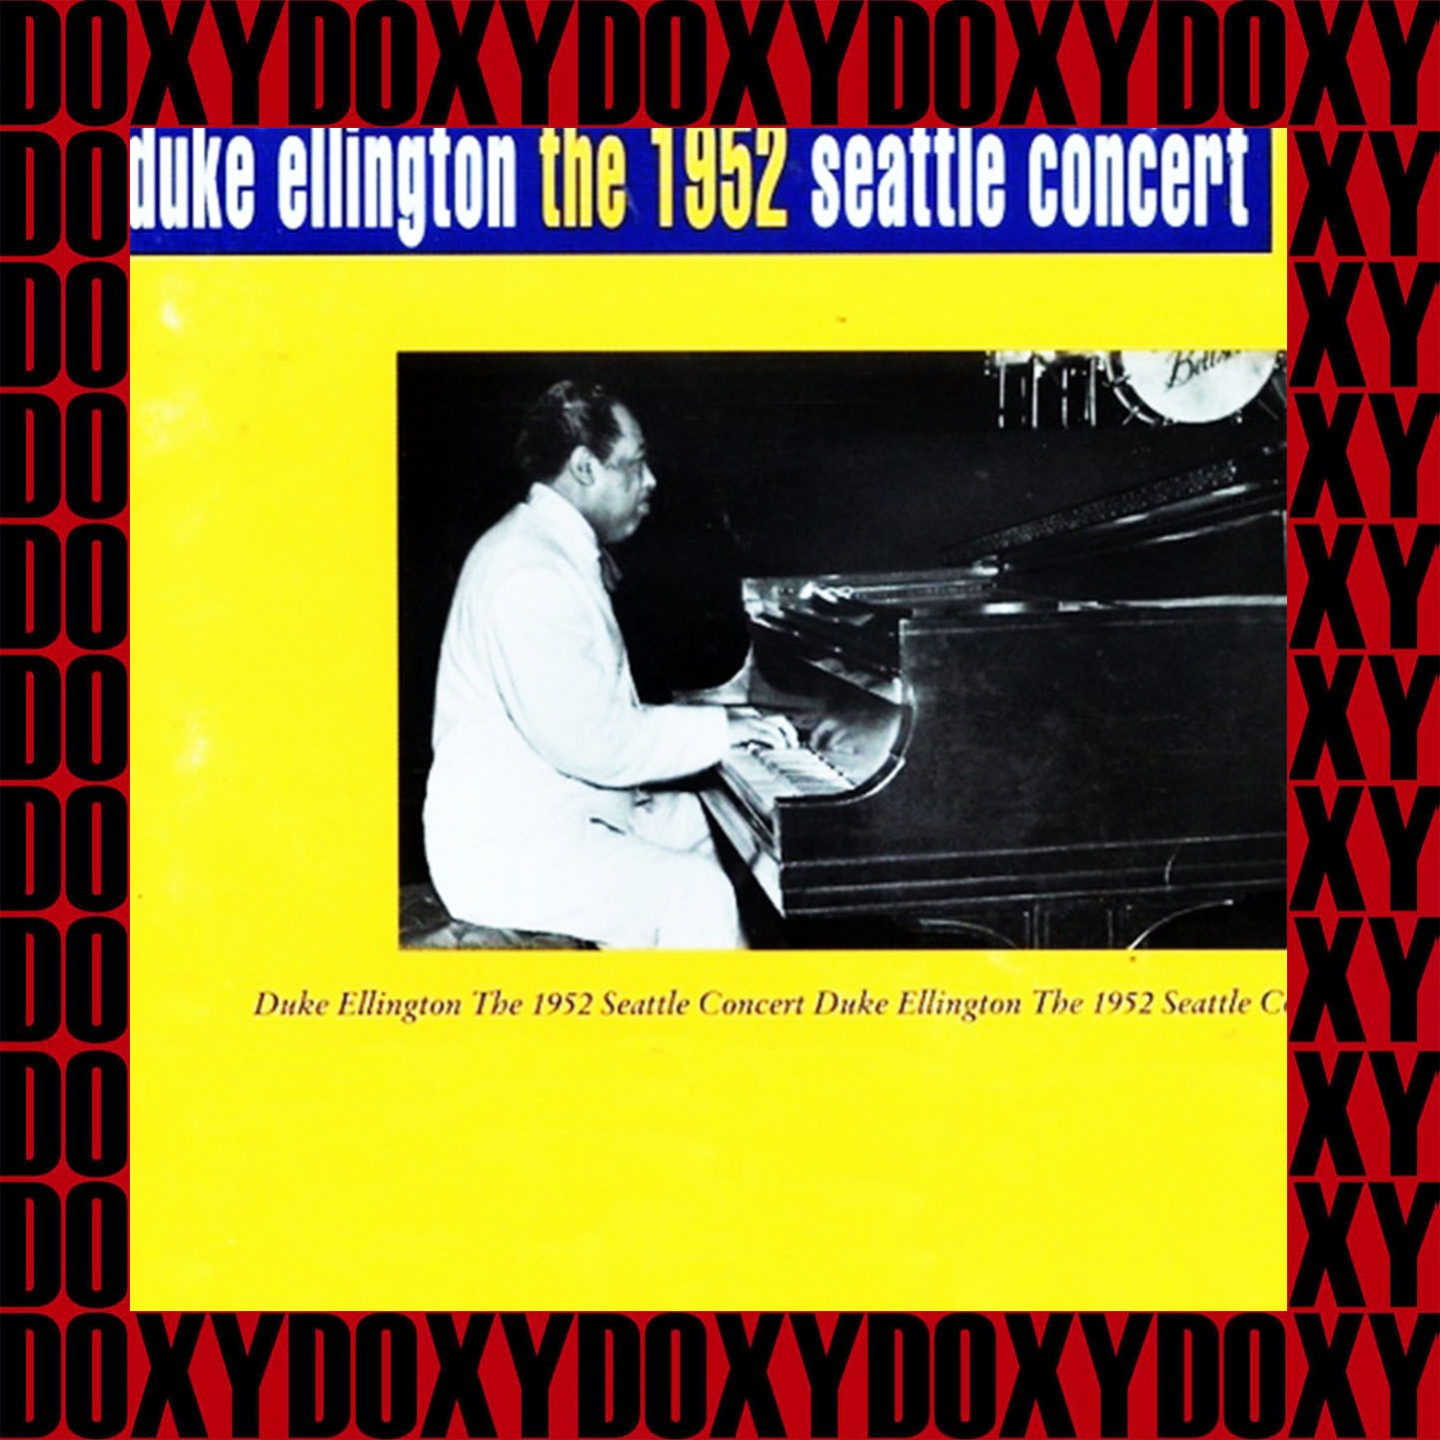 The 1952 Seattle Concert (Remastered Version) (Doxy Collection)